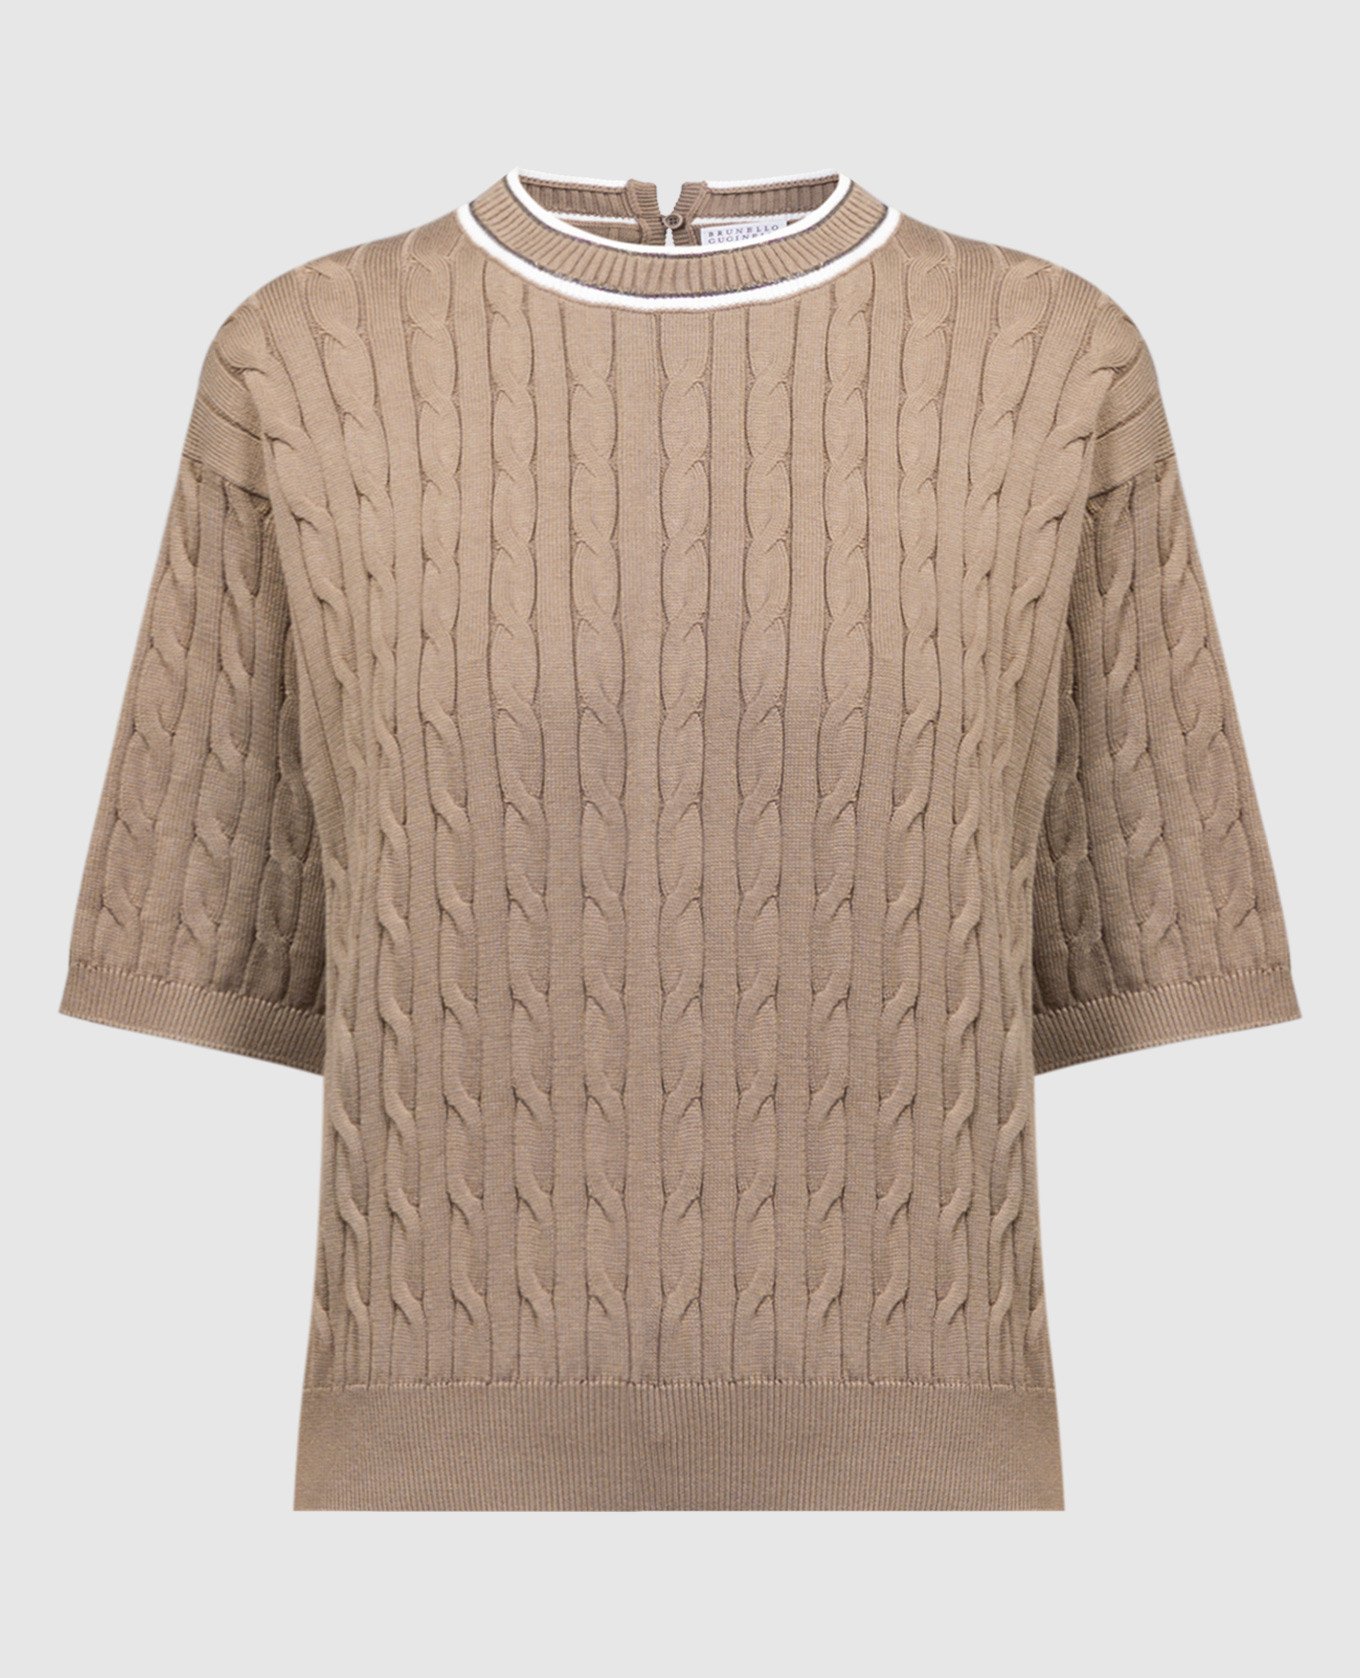 Beige jumper with a monil chain in a textured pattern